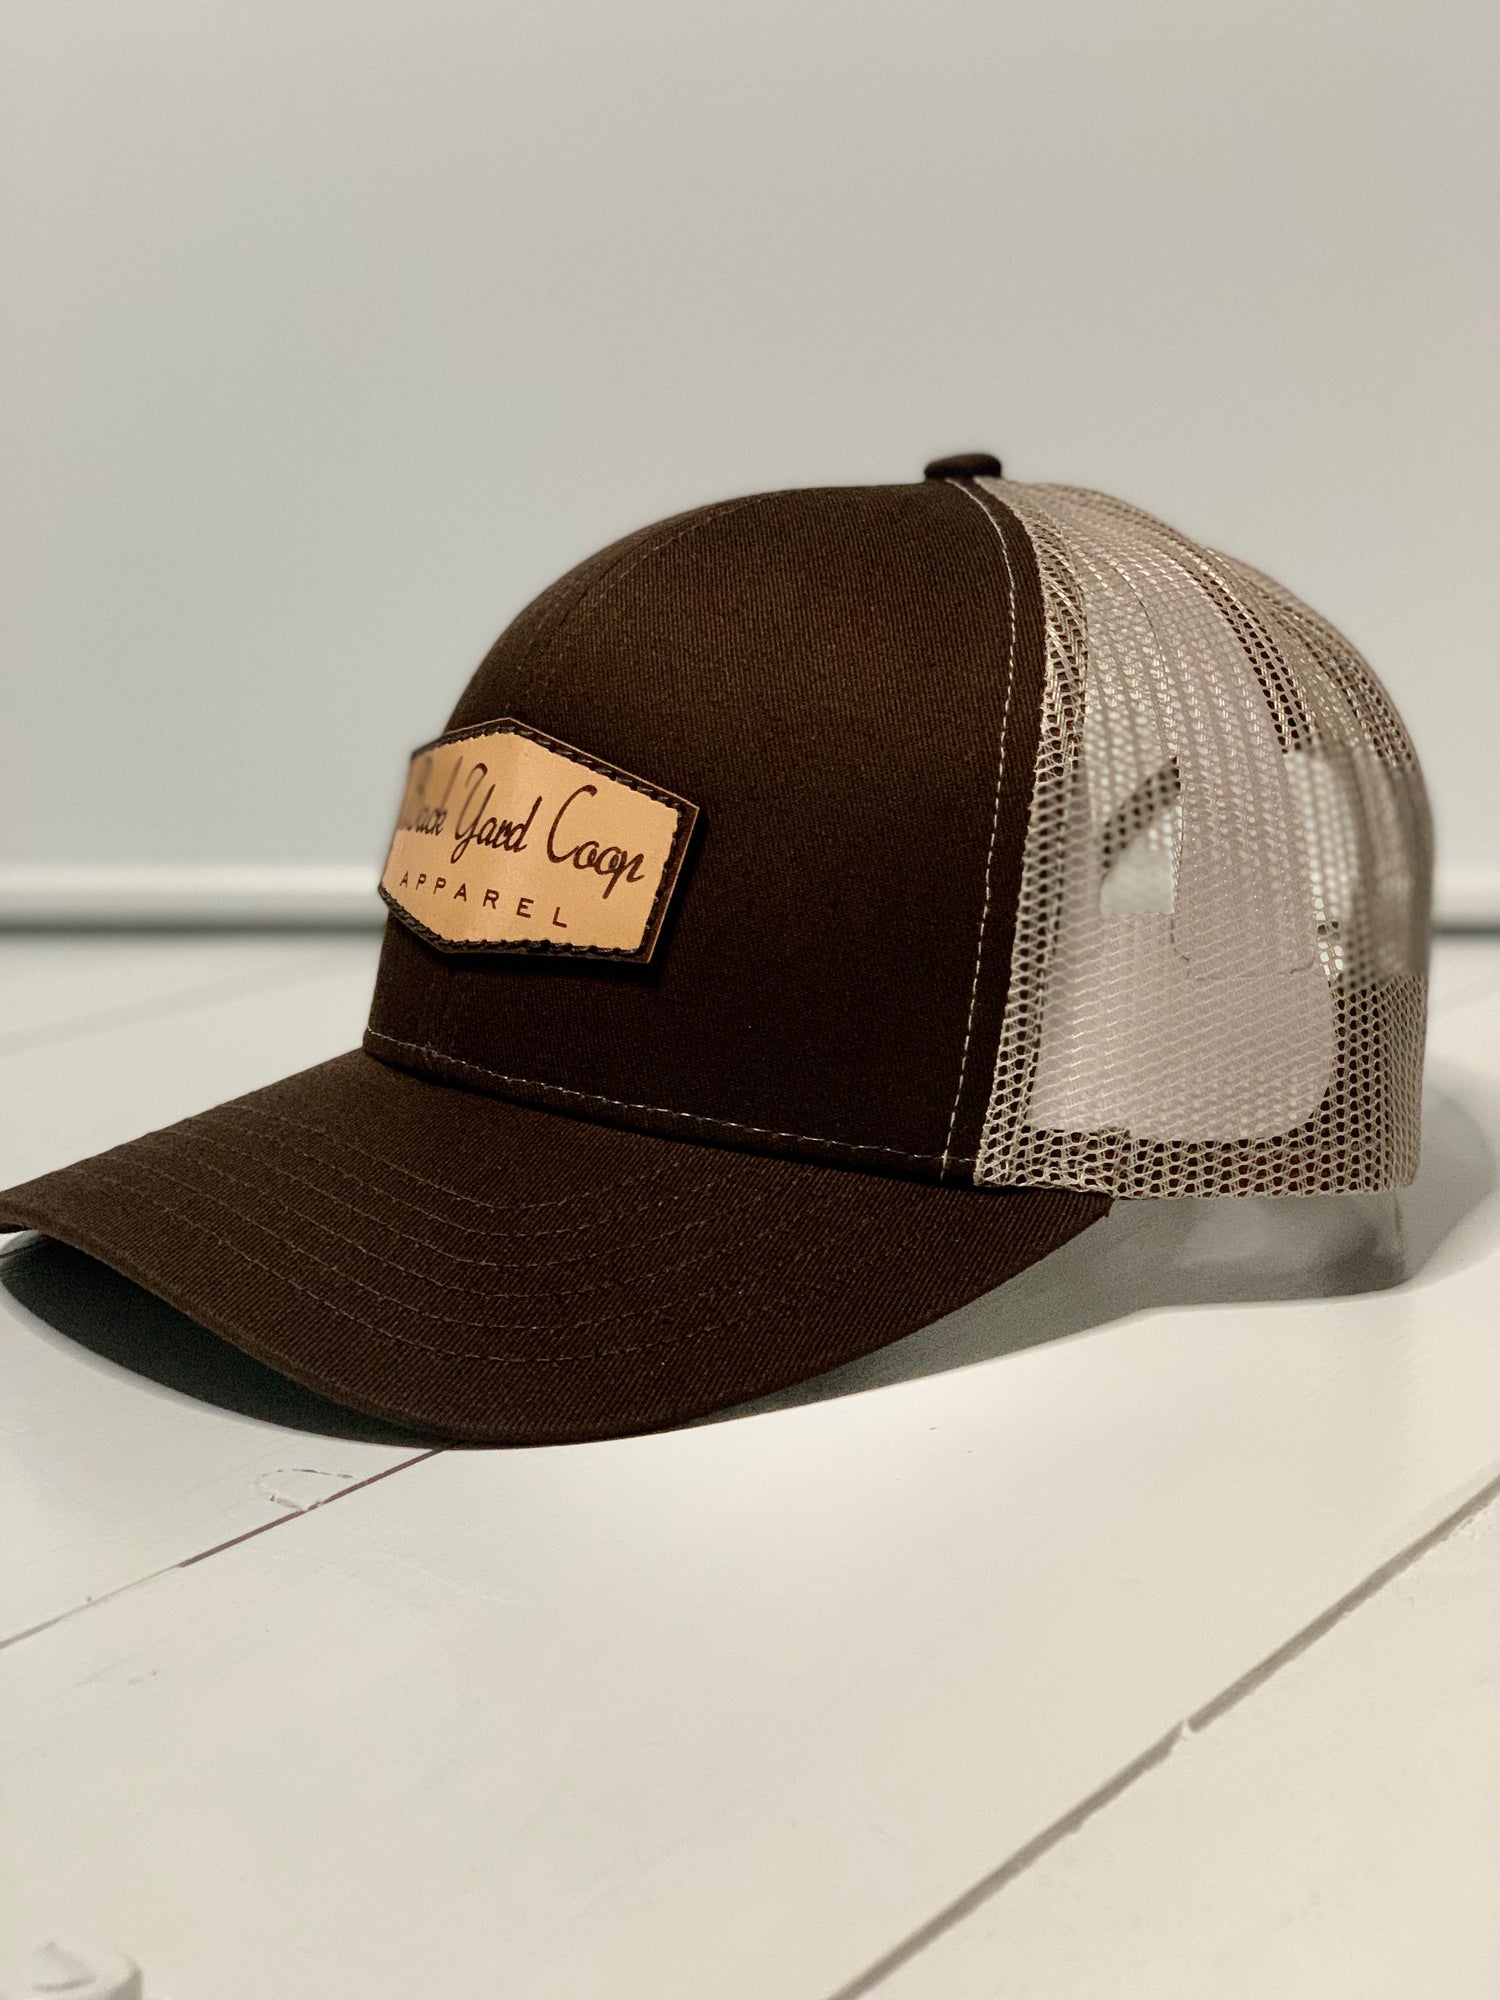 Custom Hat Patches - Signature Patches